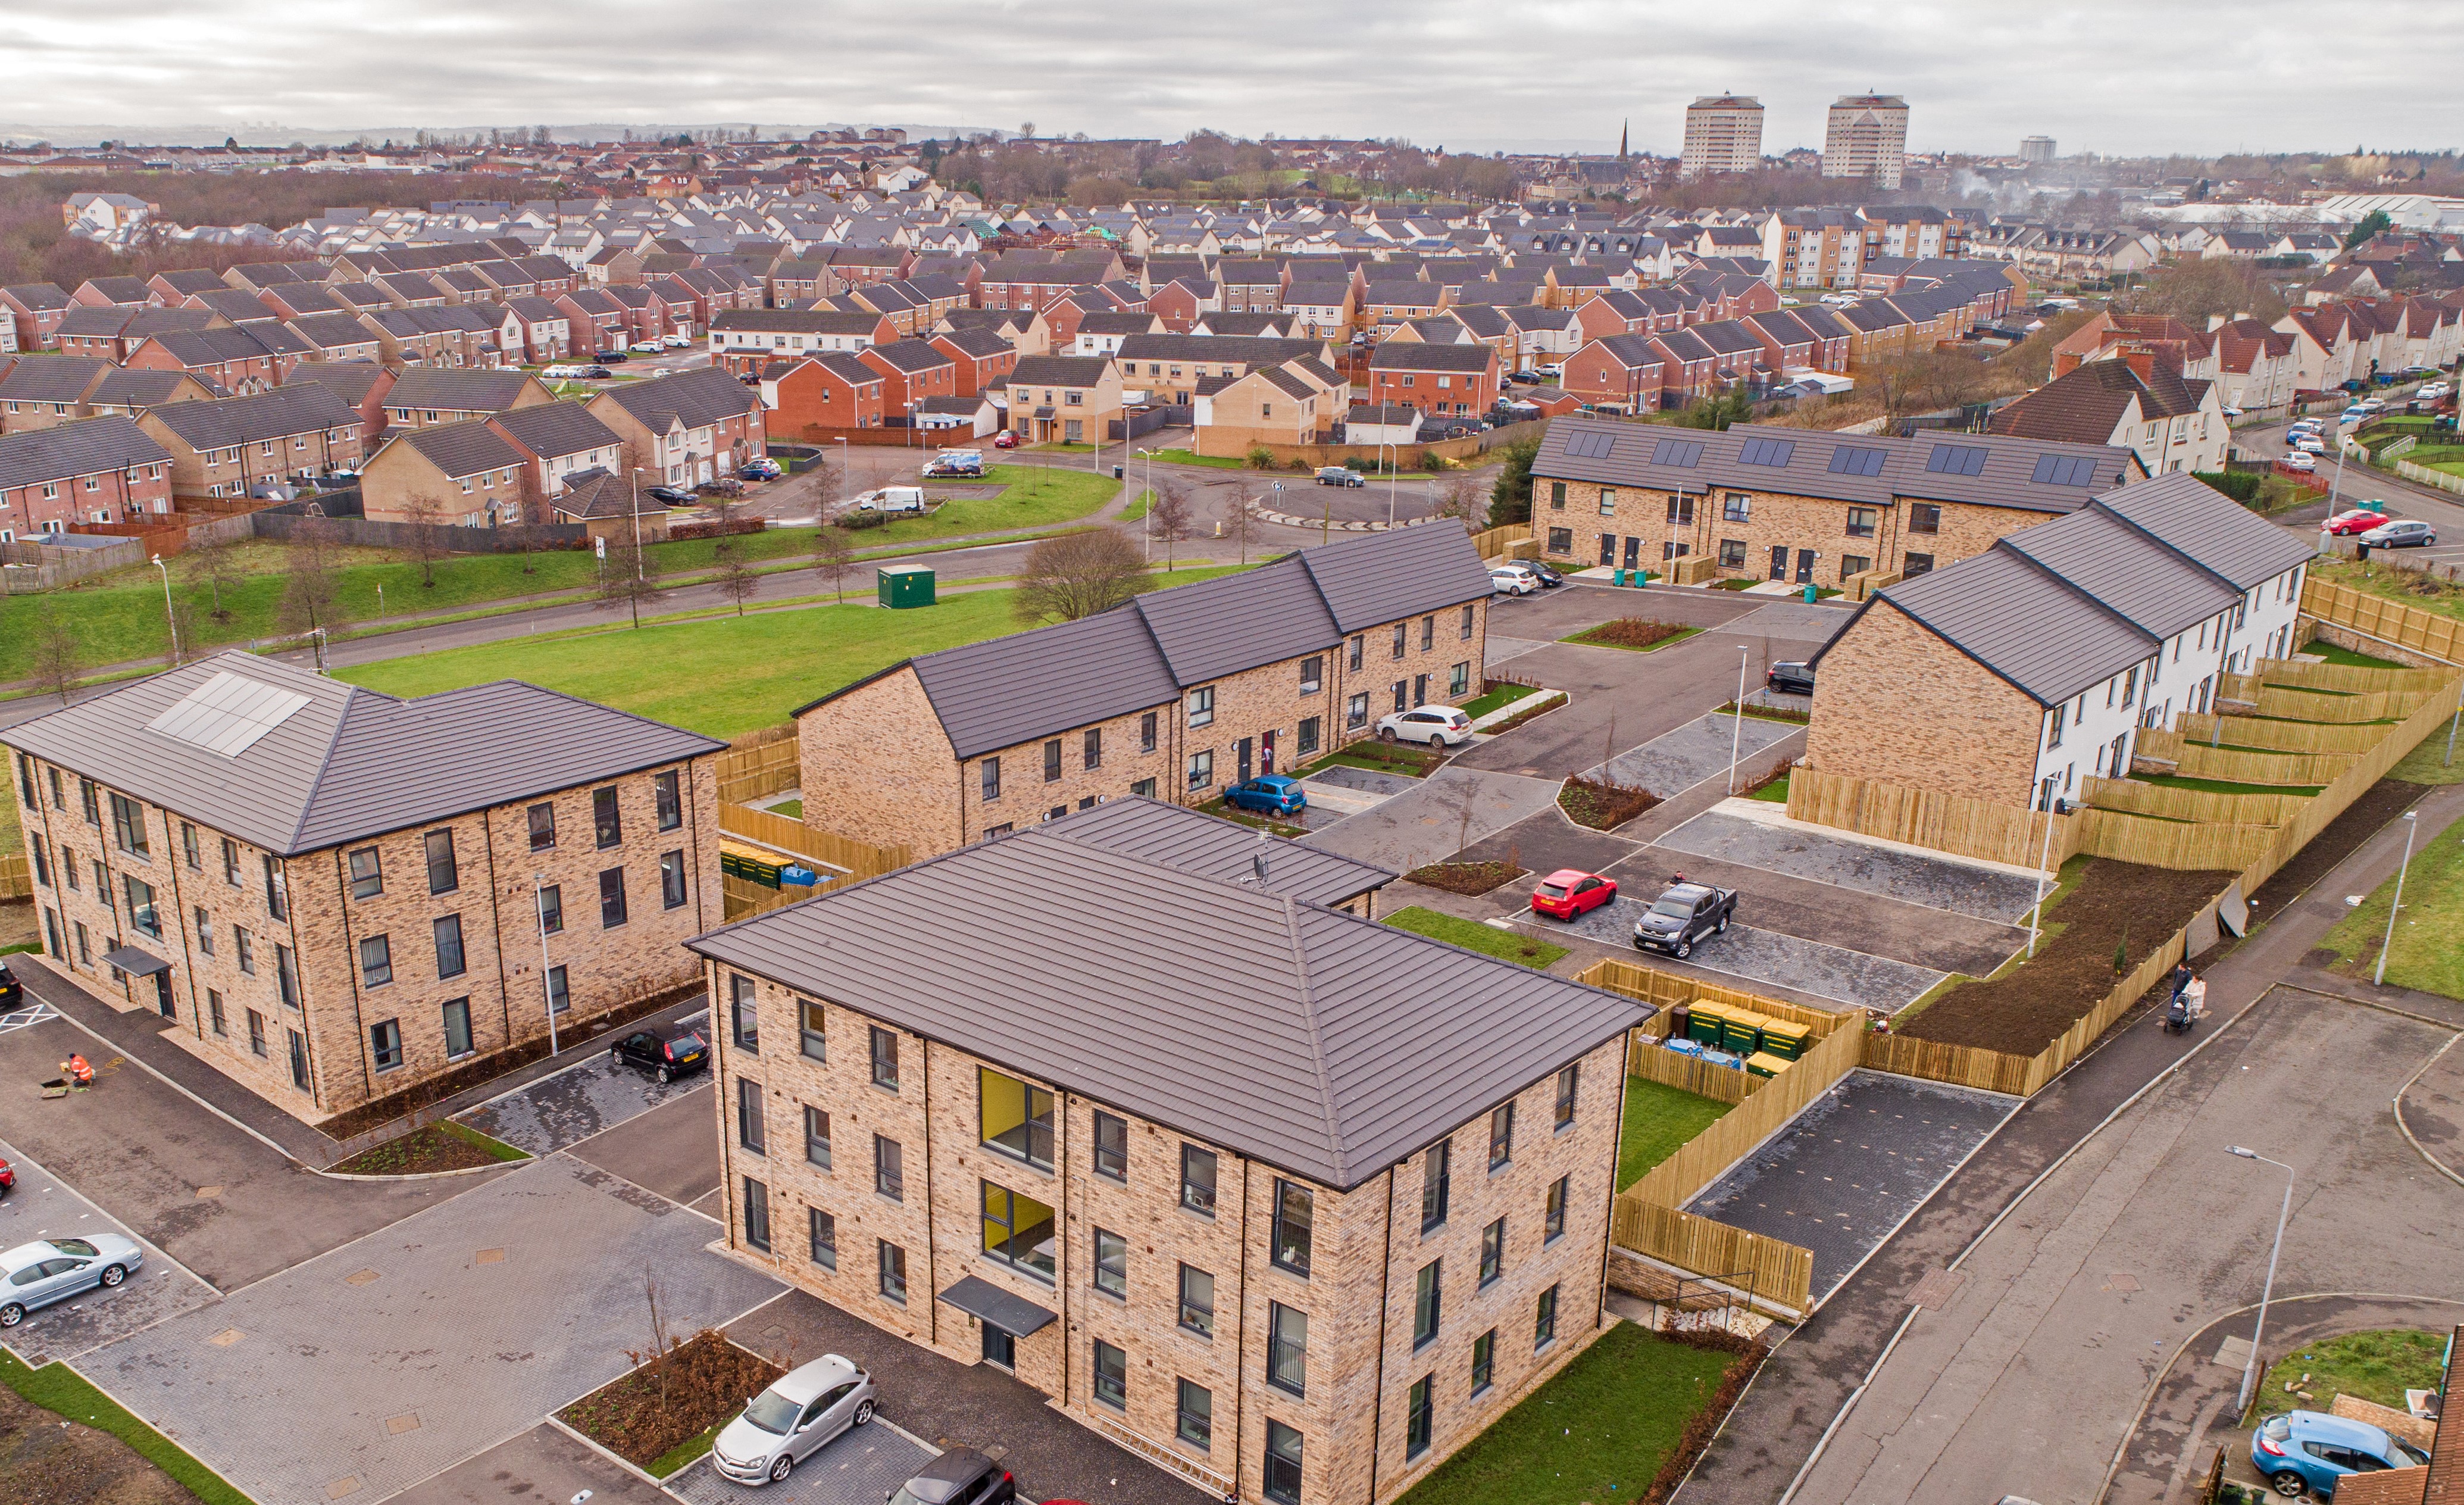 Link regenerates North Lanarkshire community with new affordable homes